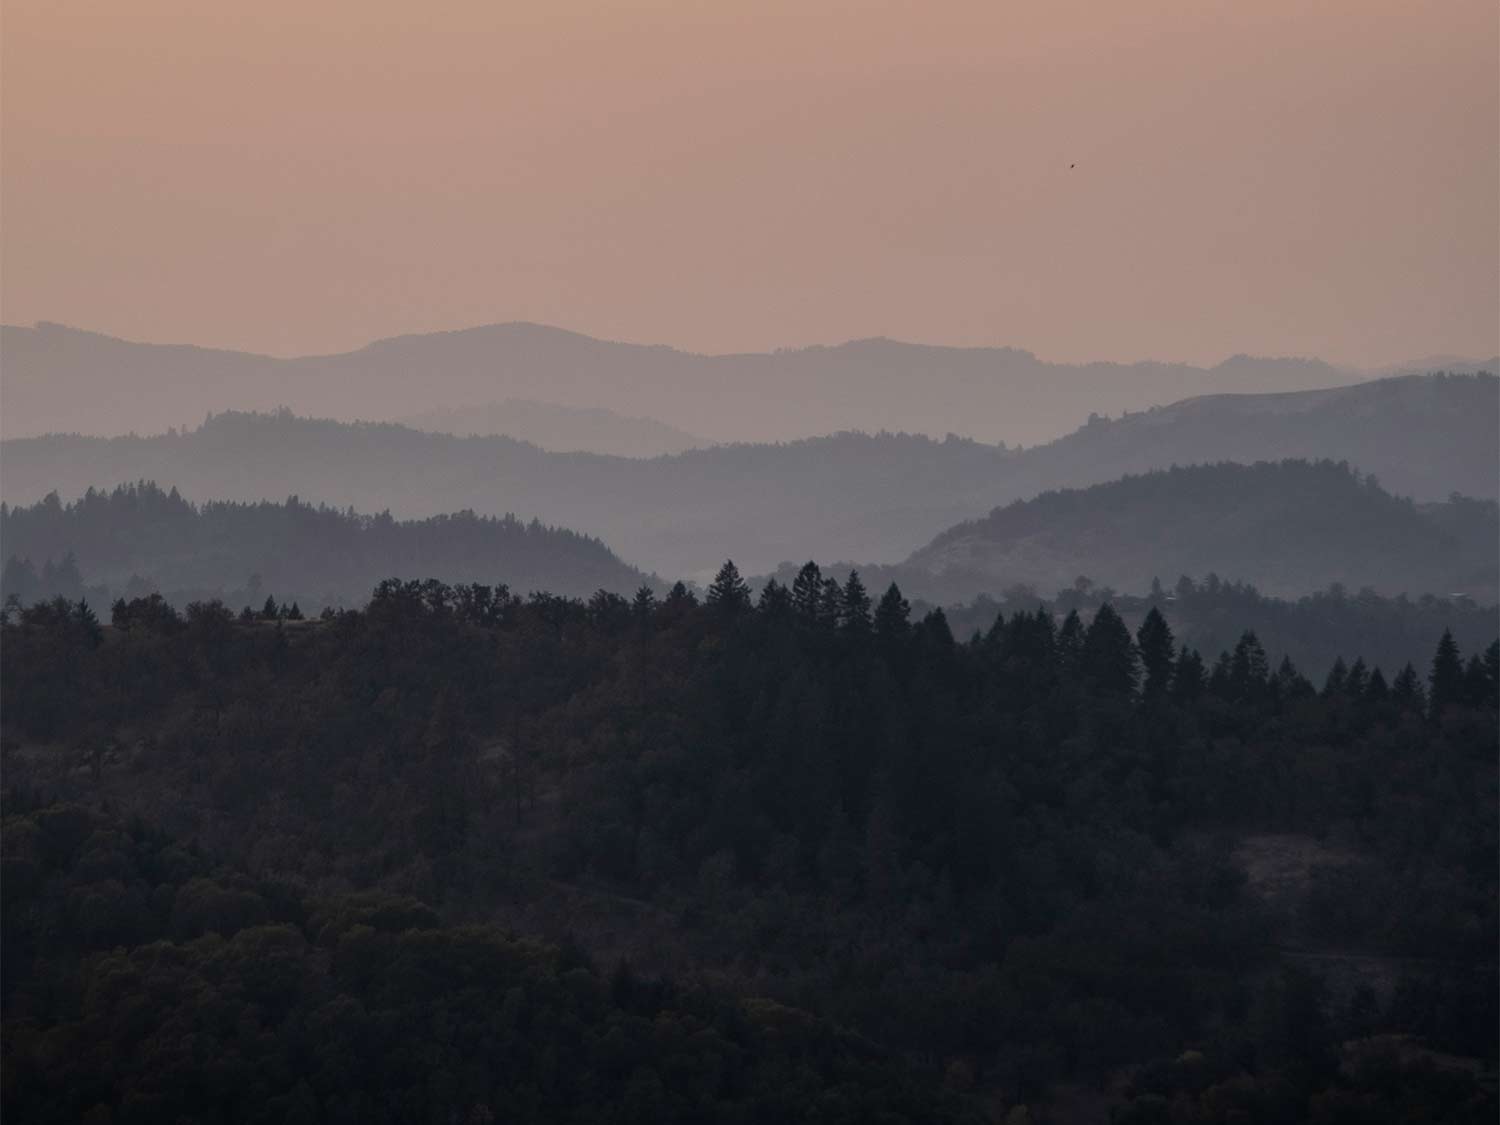 A sunset over the mountains and hillside of Oregon.